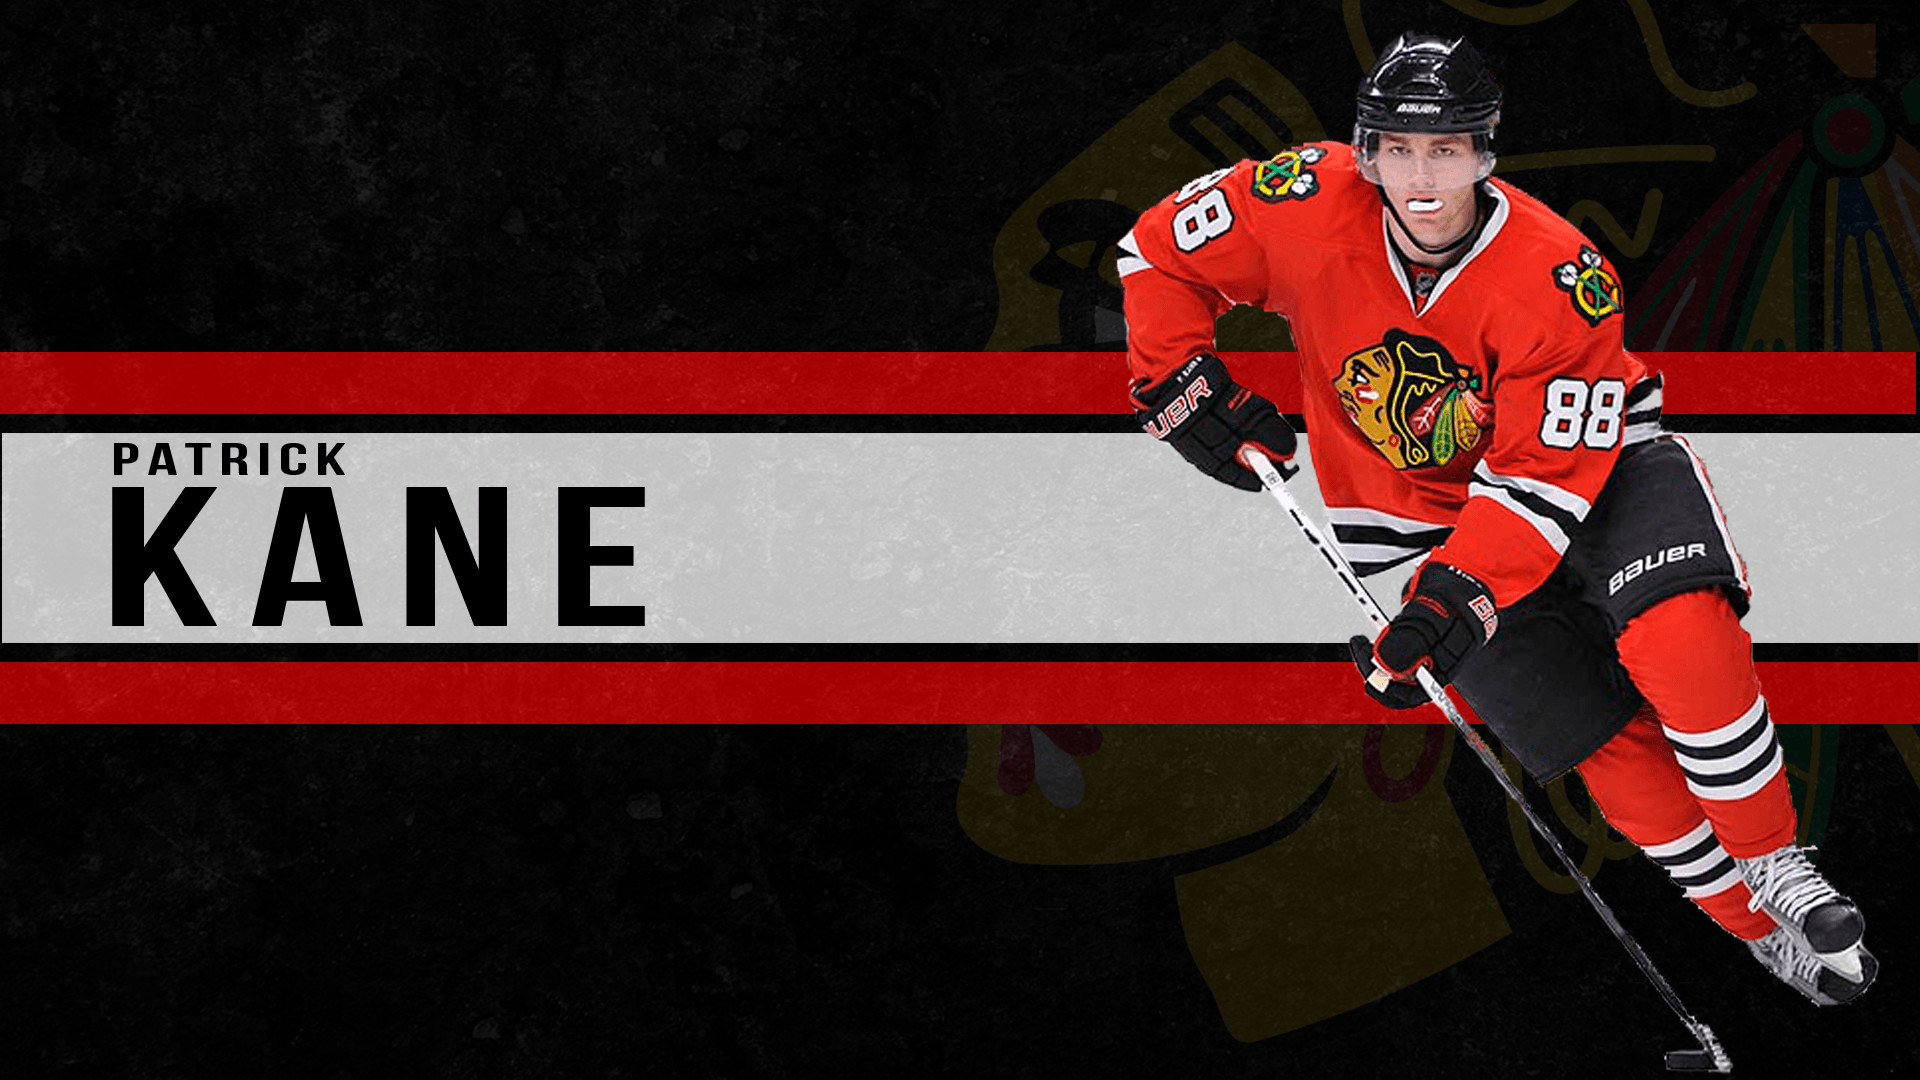 Patrick Kane Wallpapers Images Photos Pictures Backgrounds